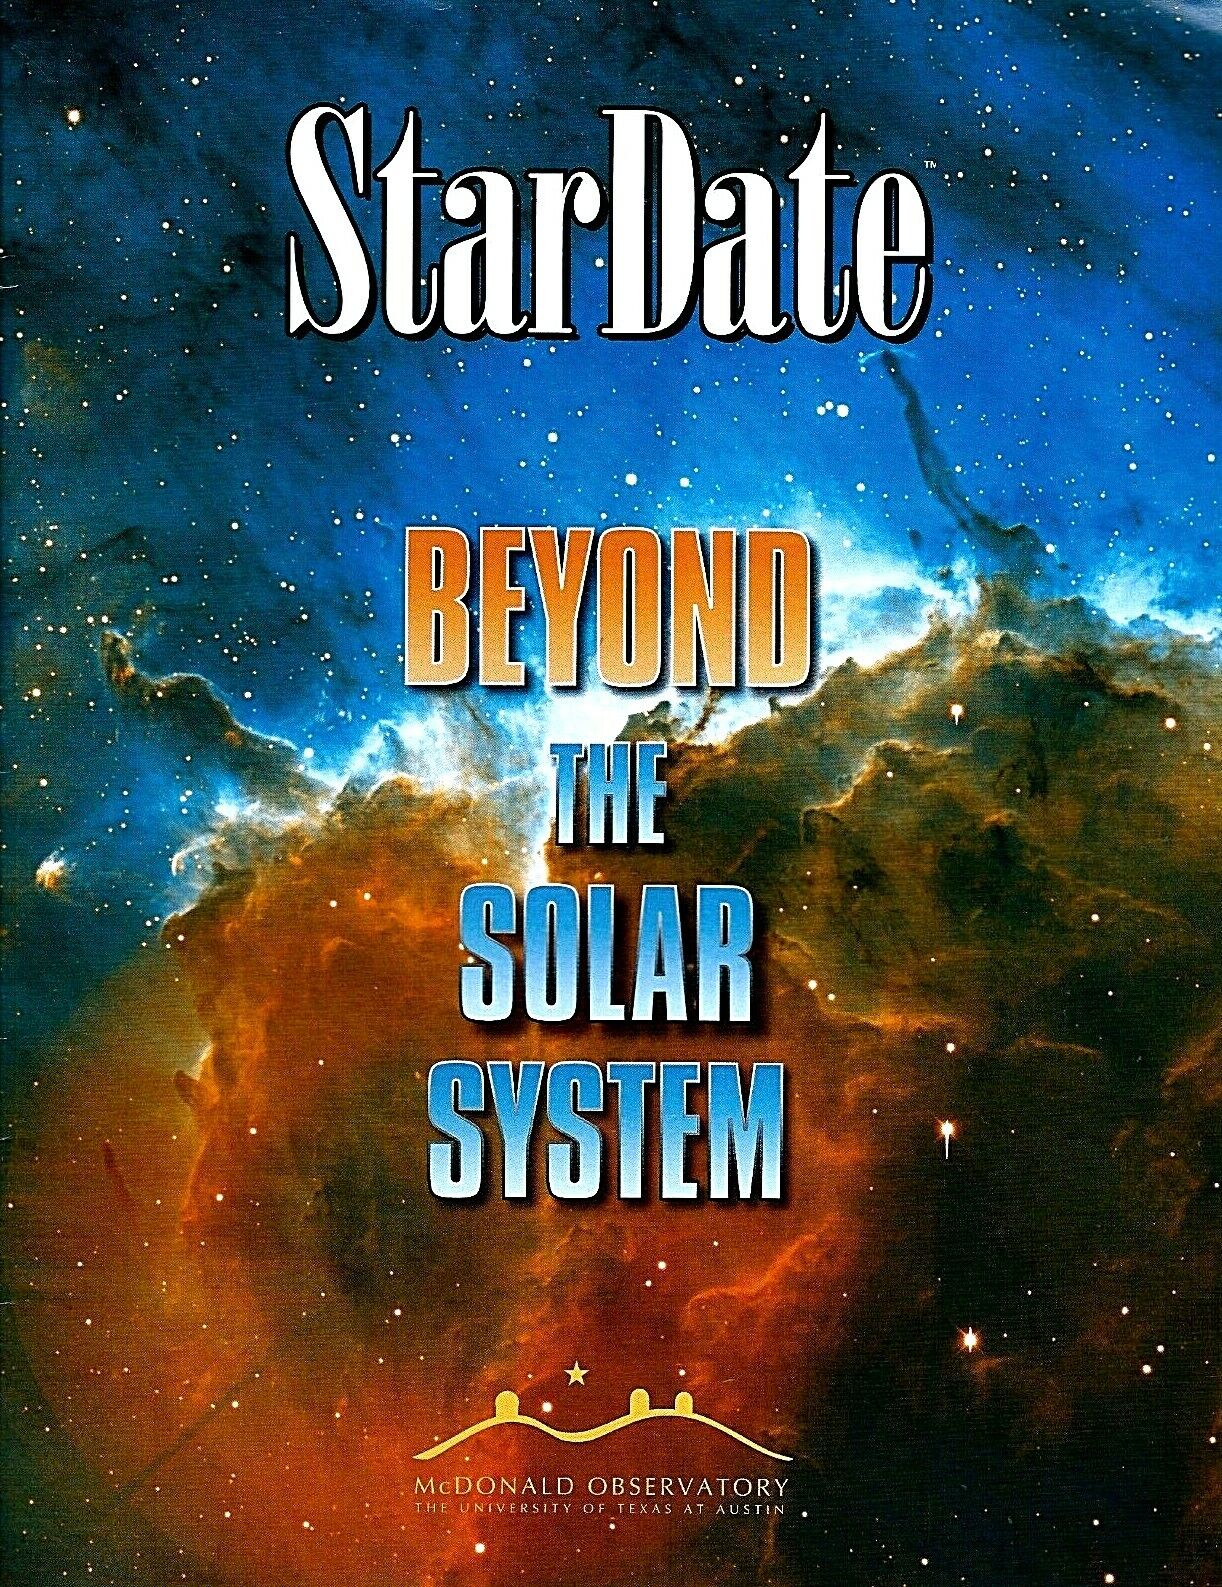 Star Date: Beyond the Solar System From UT\'s McDonald Observatory Ages 11 and Up